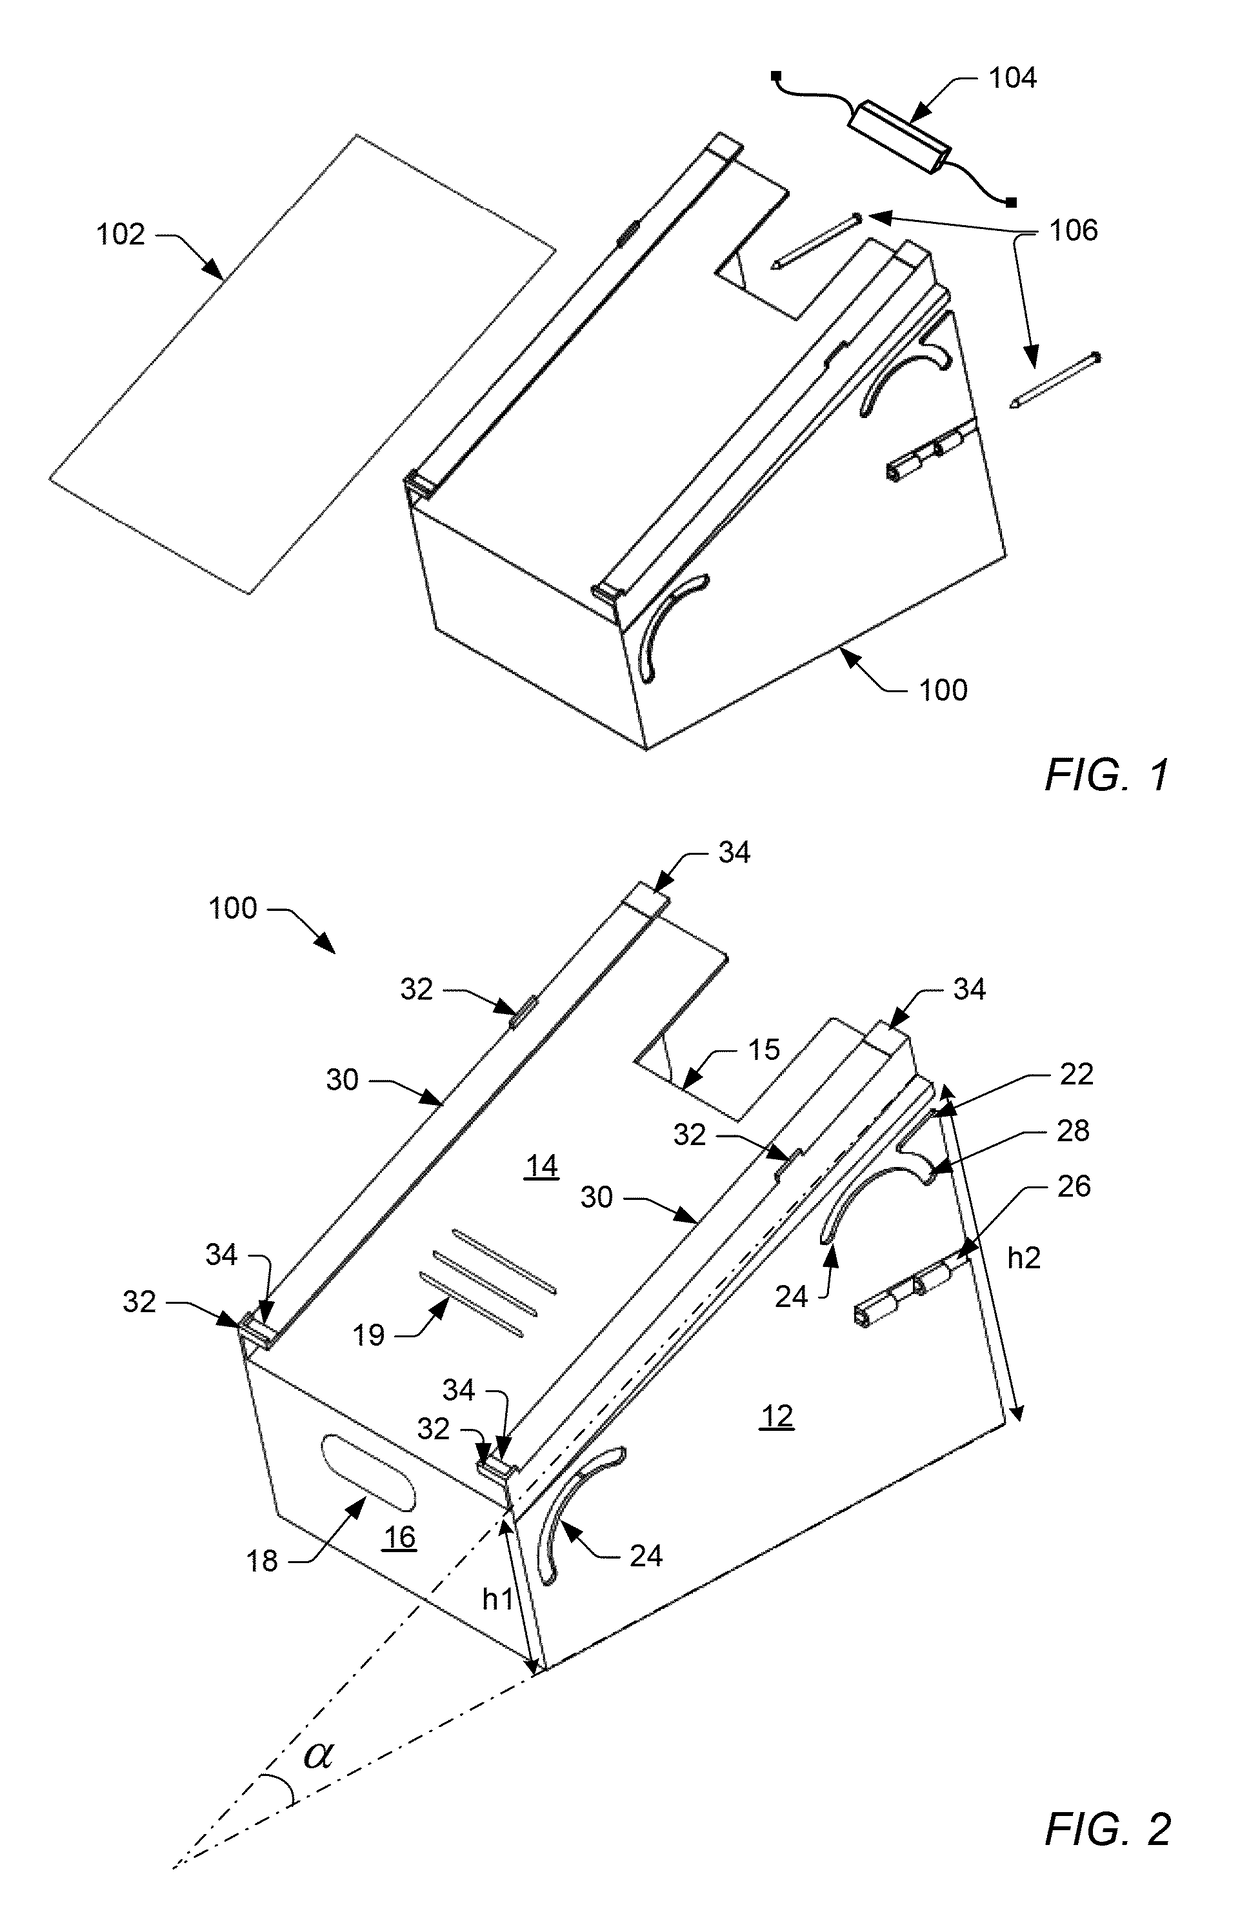 Mounting unit for solar electricity generation systems and improved installation method